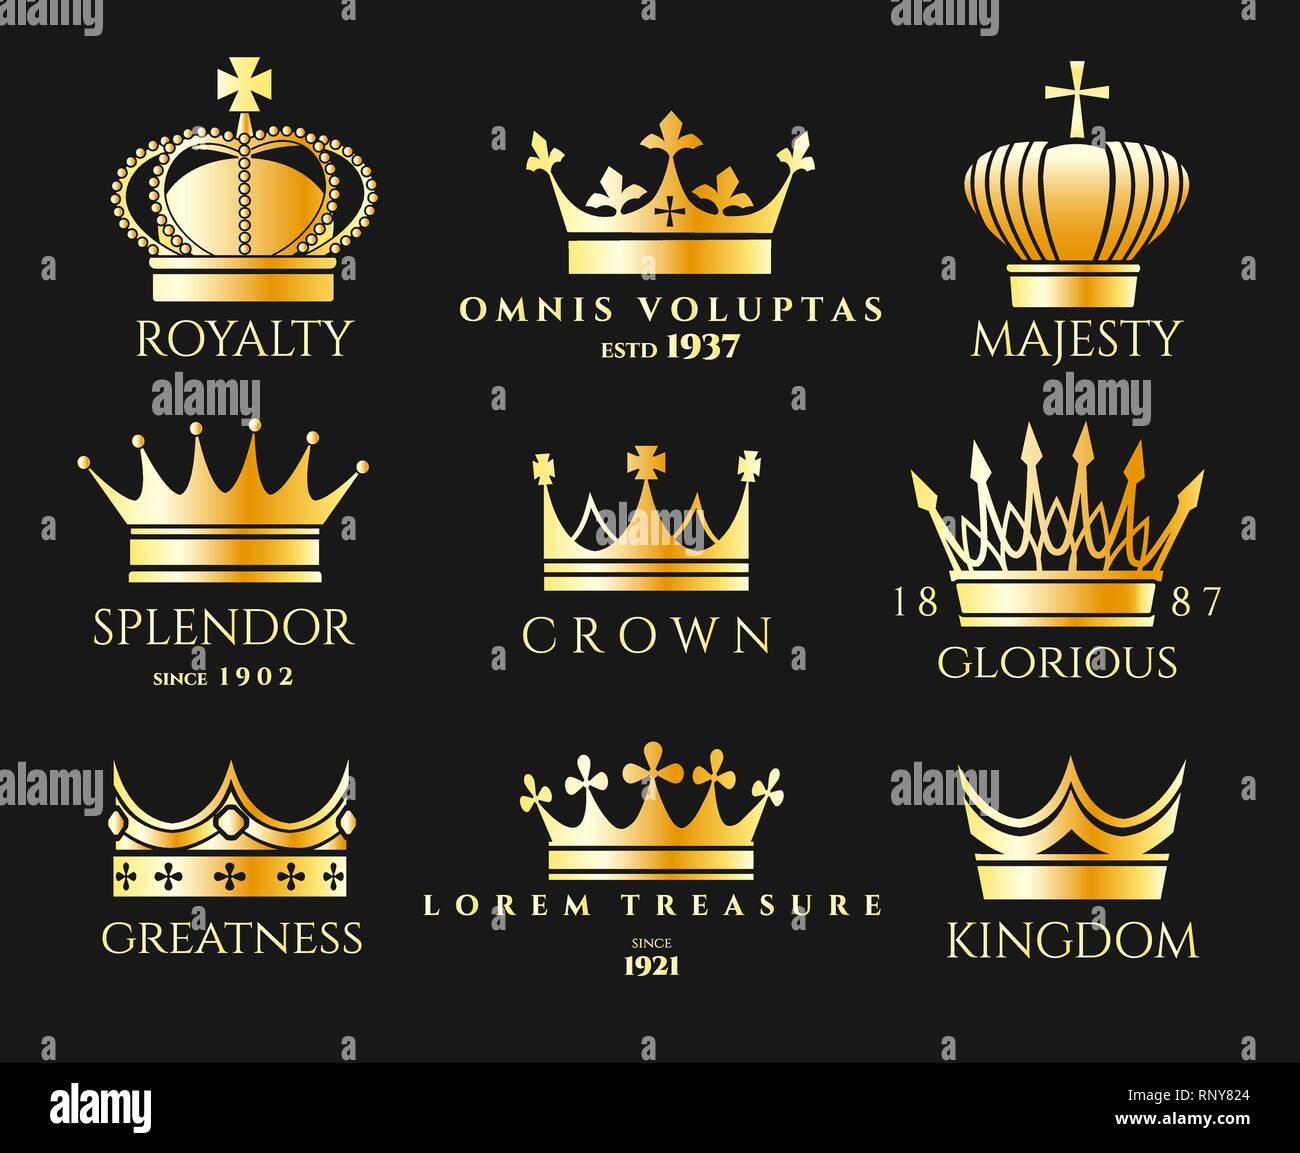 Crown logo set. Luxury crowns logos, queen and king heraldic imperial vector emblems Stock Vector